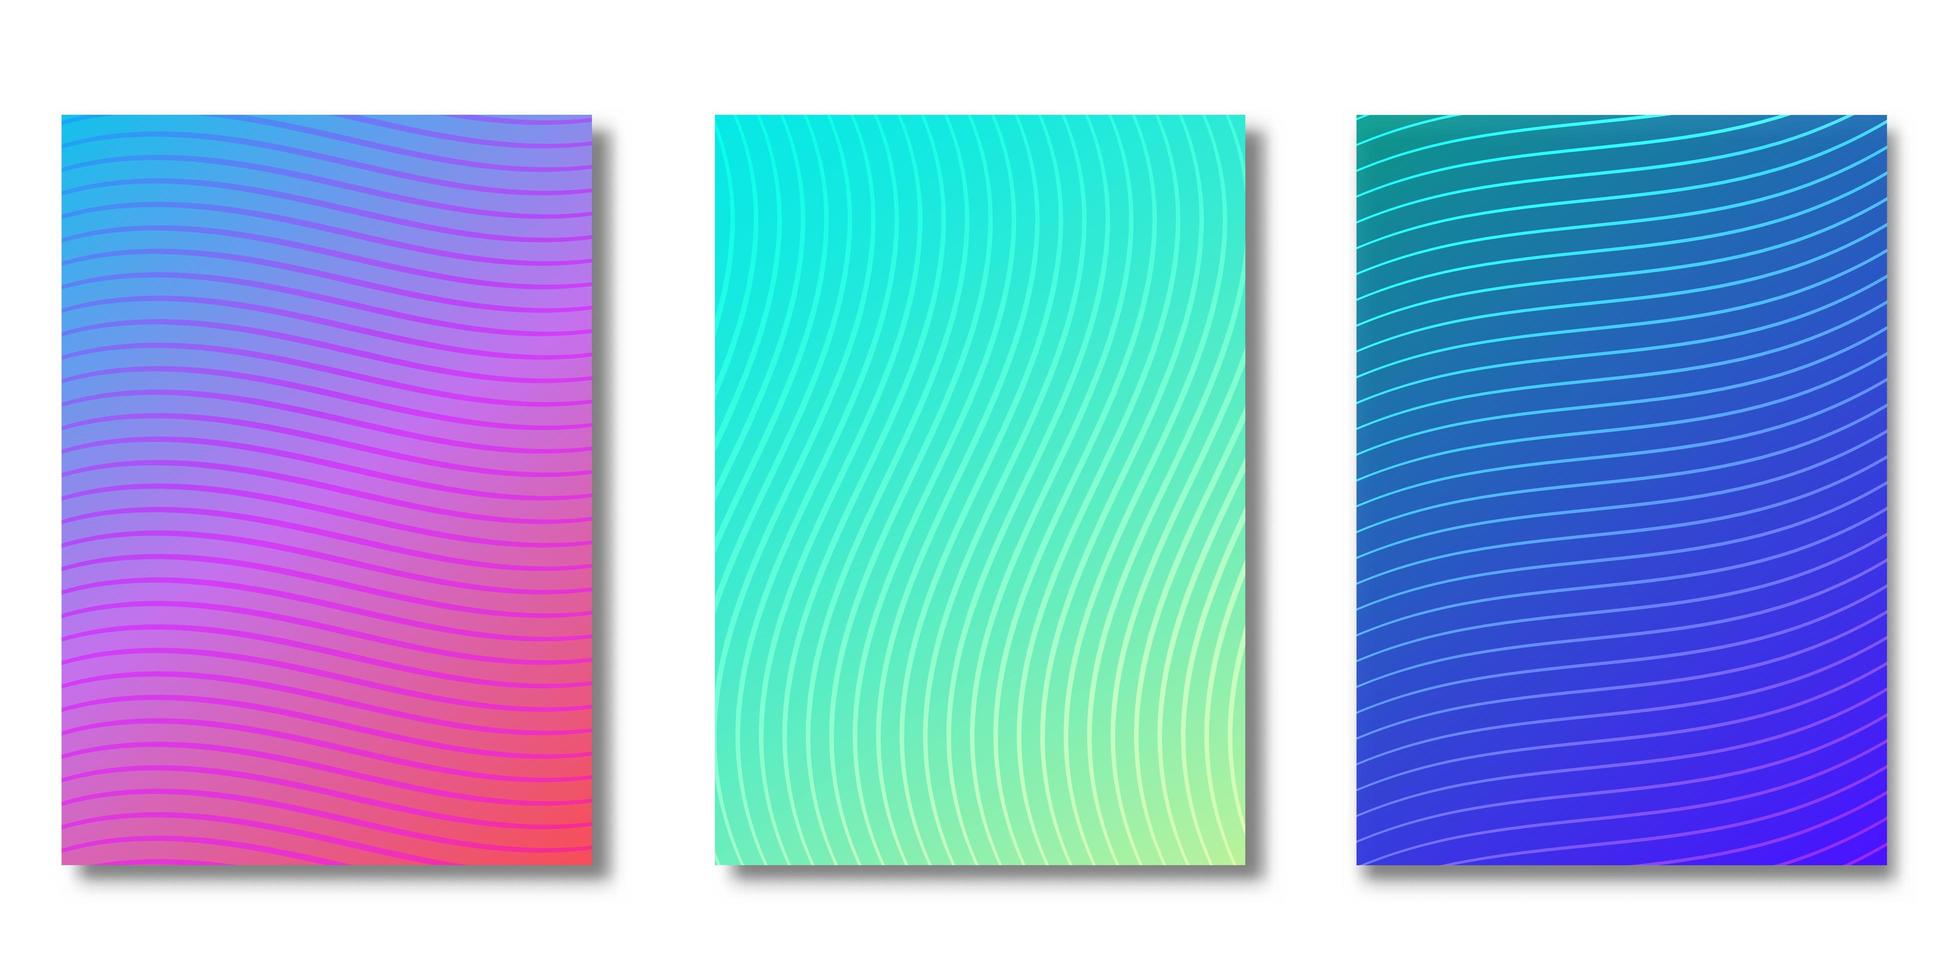 Gradient cover set with wave line patterns vector